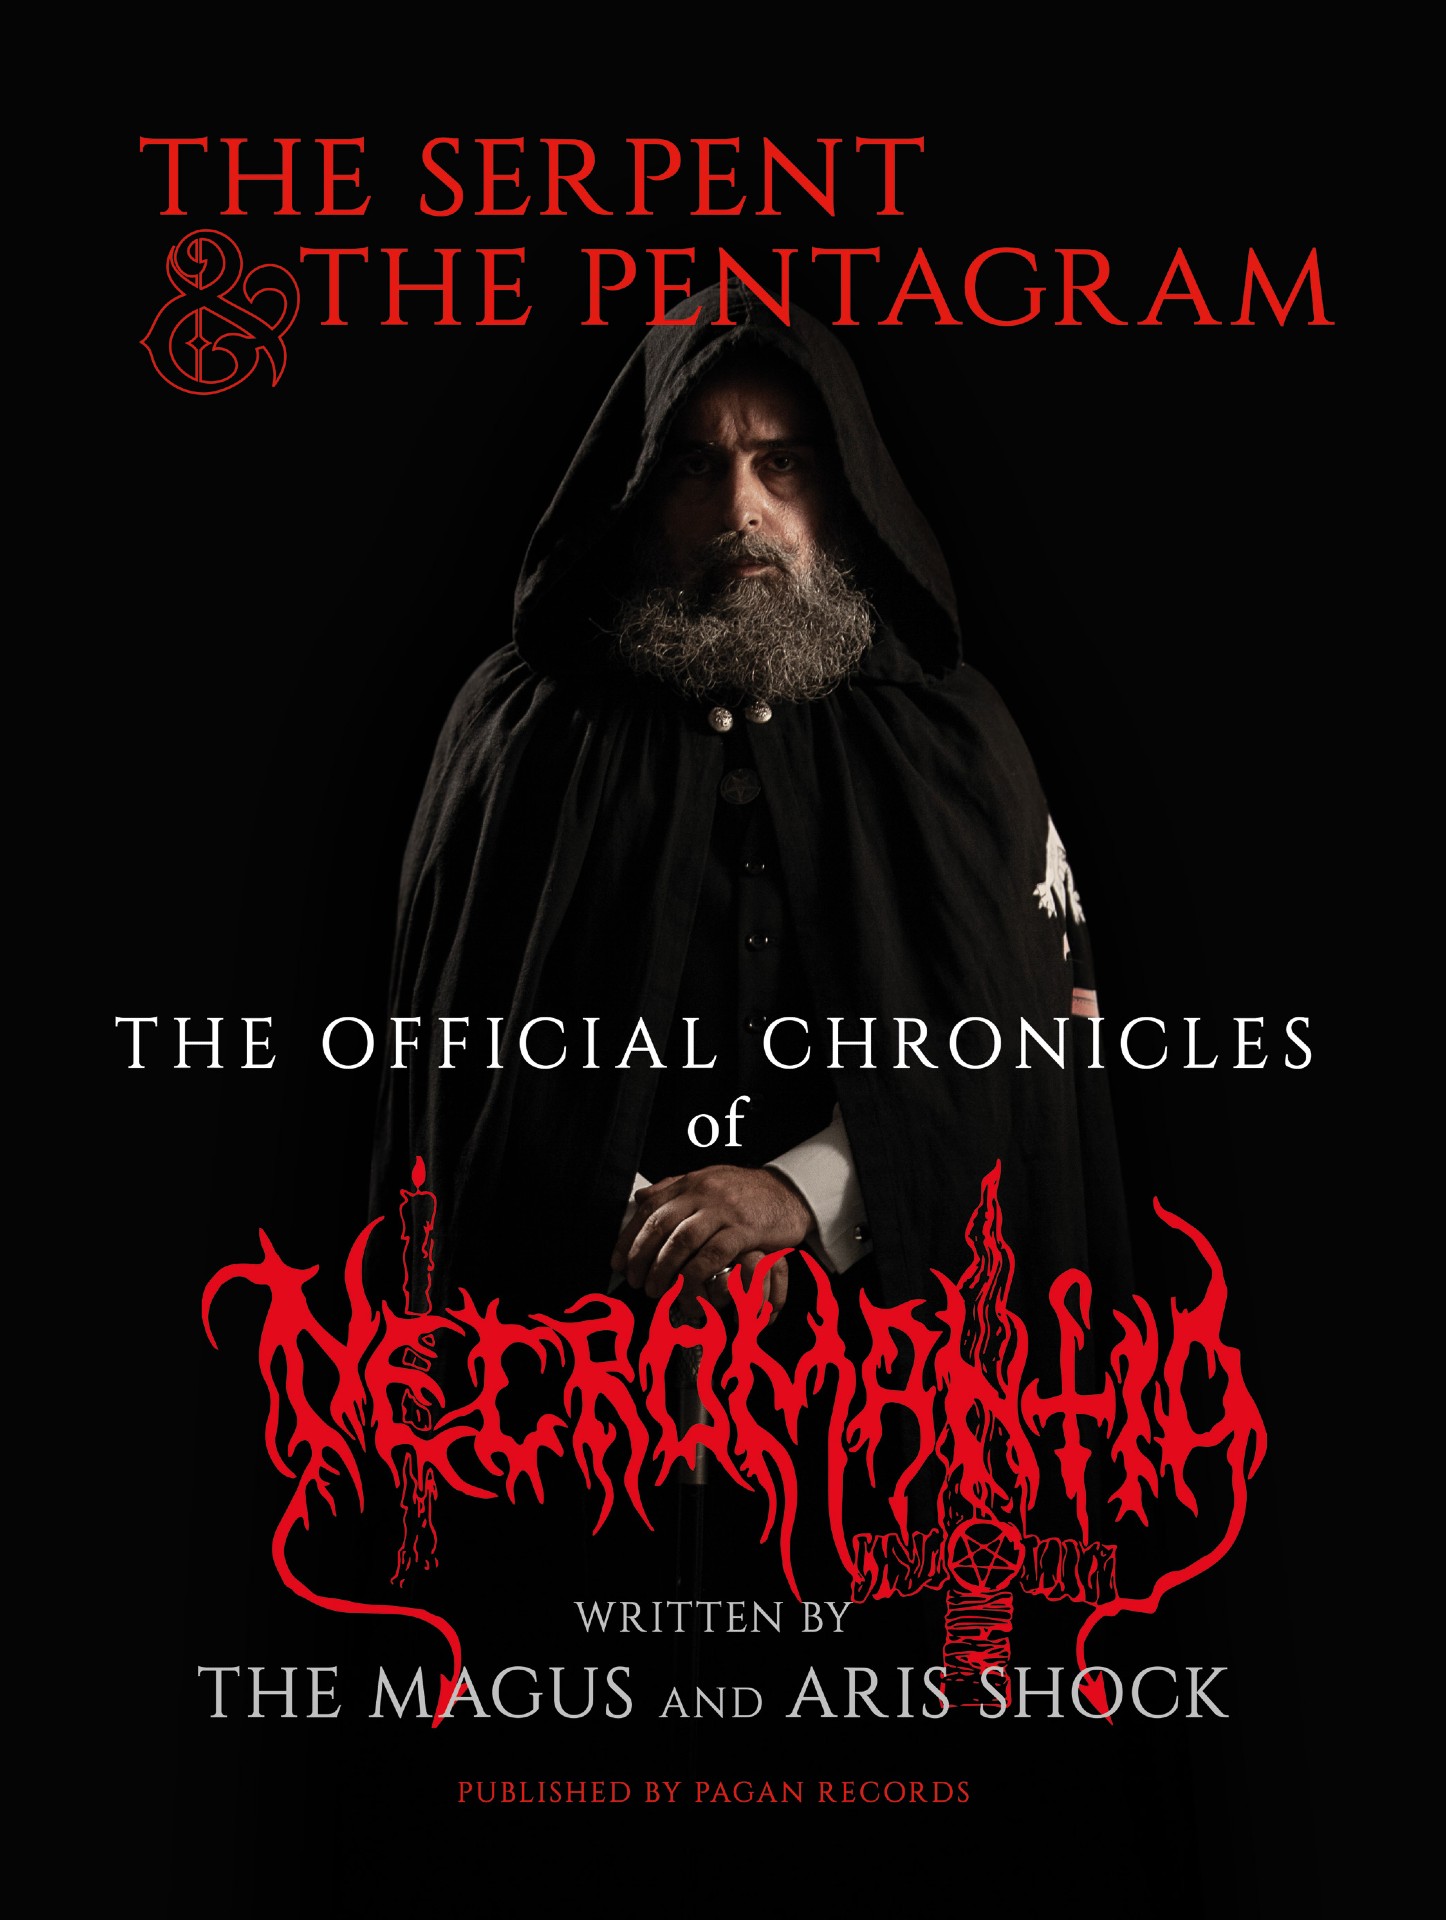 “The Serpent and the Pentagram” book cover